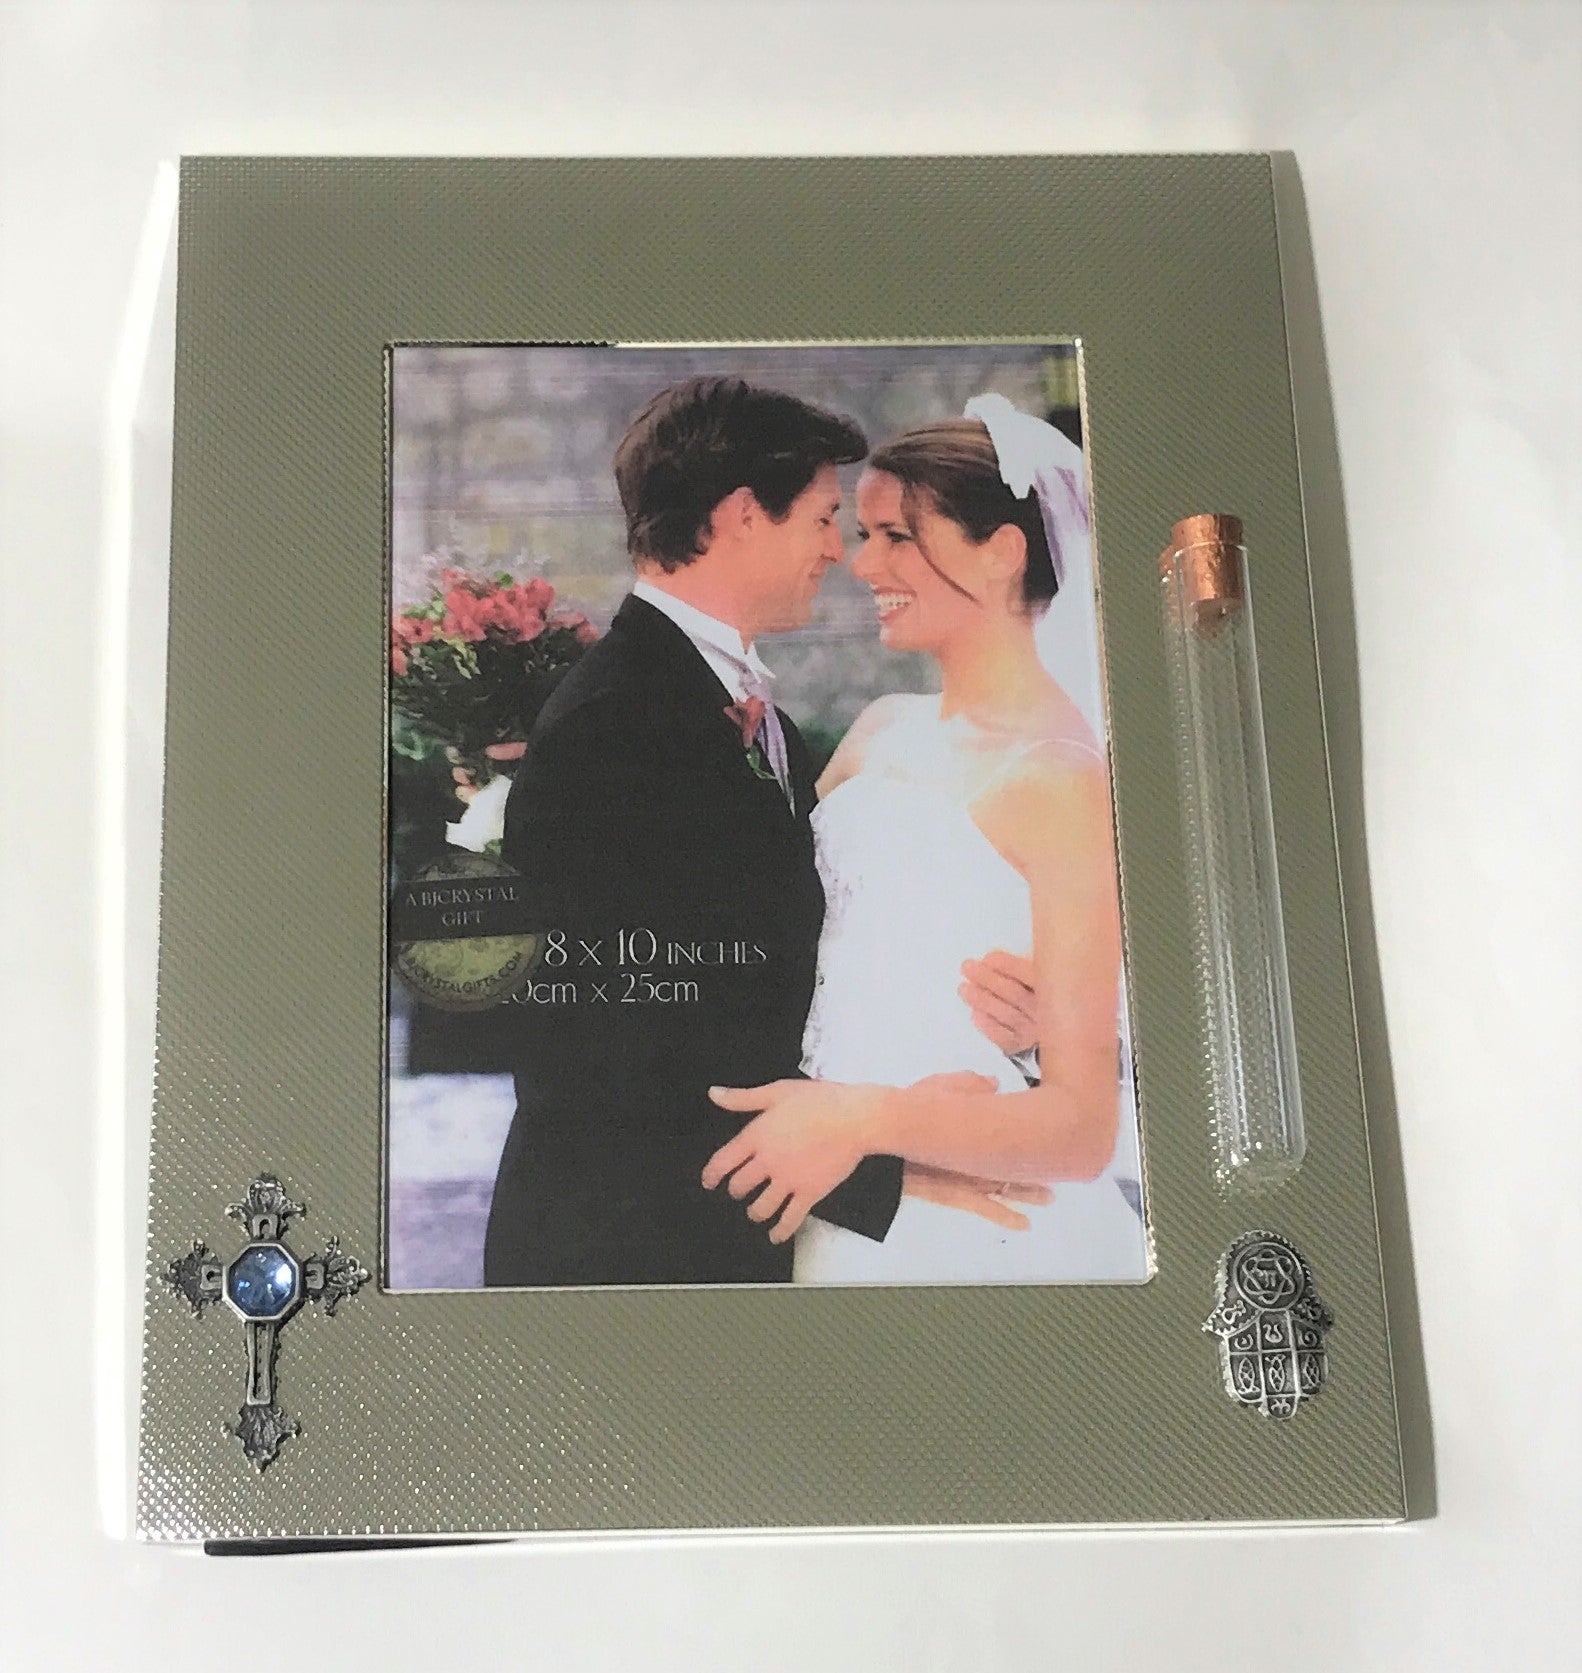 Interfaith Wedding Picture Frame - Frame With Cross And Chamsa - Tube For Shards Of Glass Broken At Wedding Ceremony - 8x10